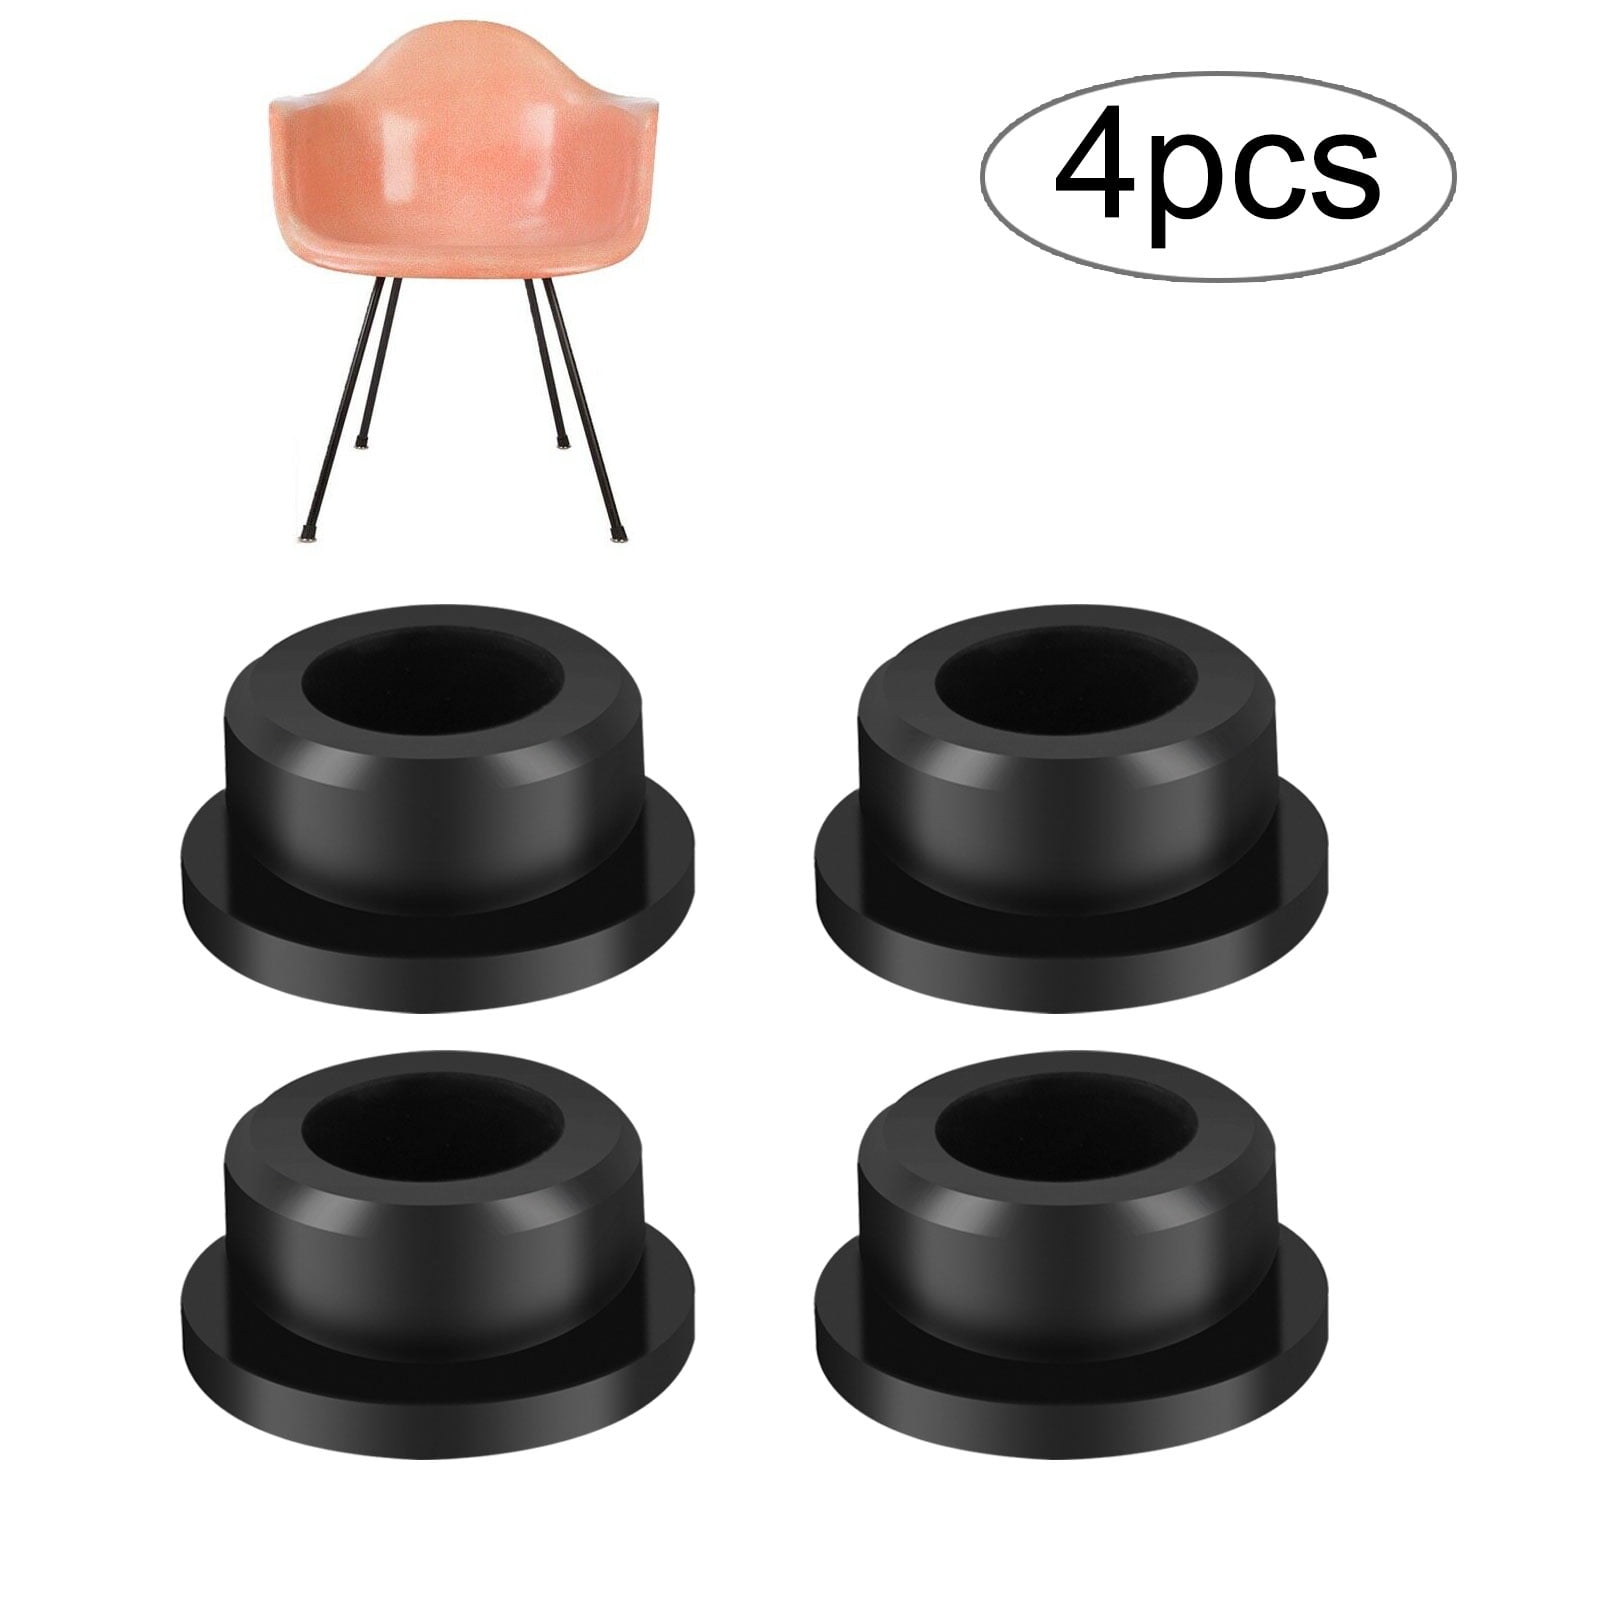 EIFFEL TOWER BASE RUBBER DOME GLIDES FOR HERMAN MILLER/EAMES chair feet Set of 4 